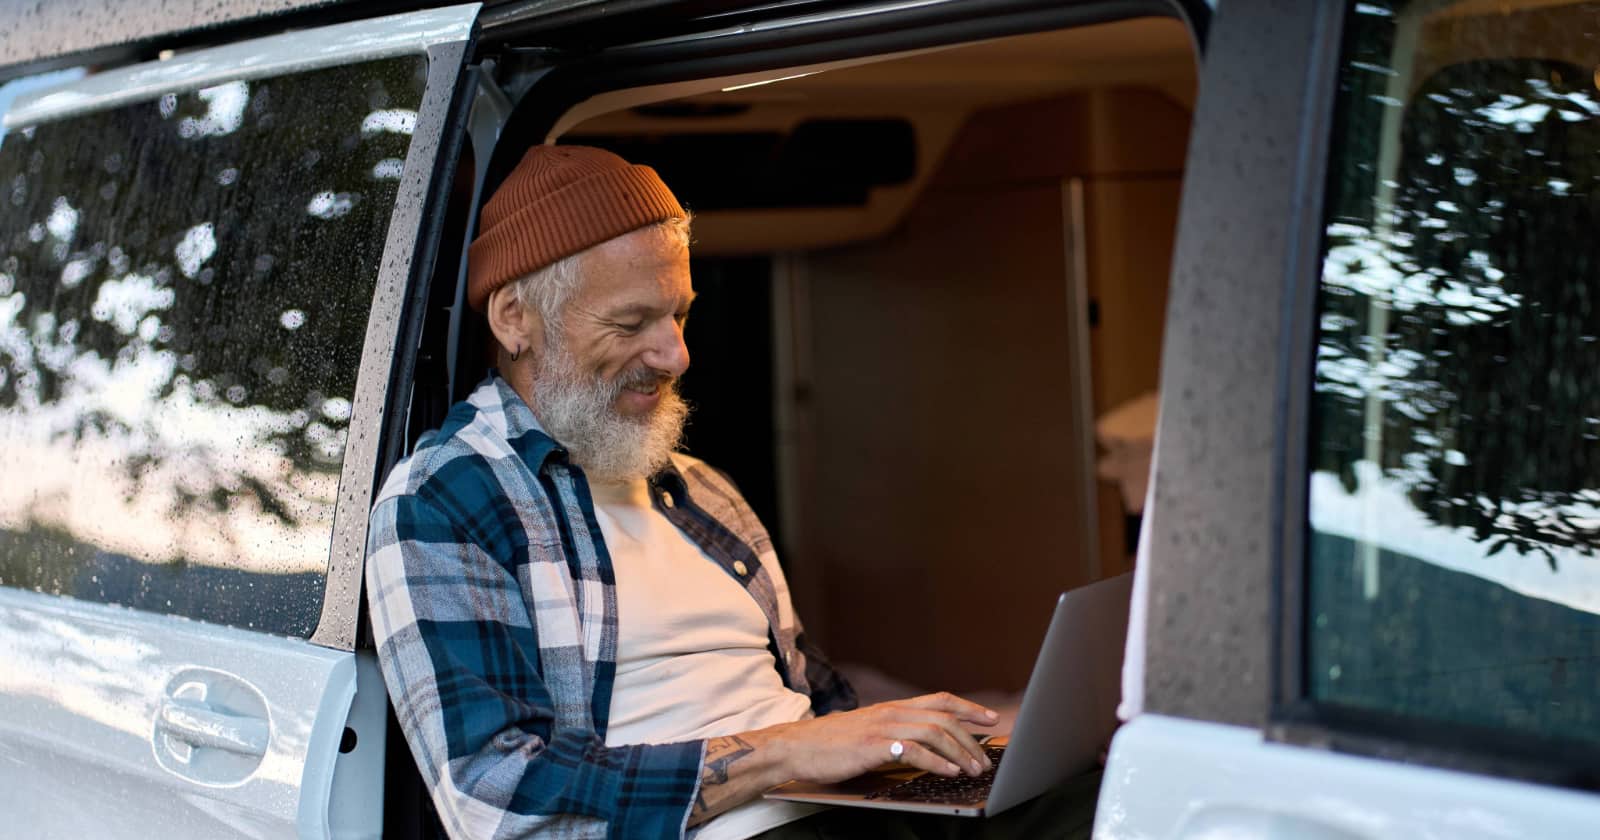 A man using the internet in his van.